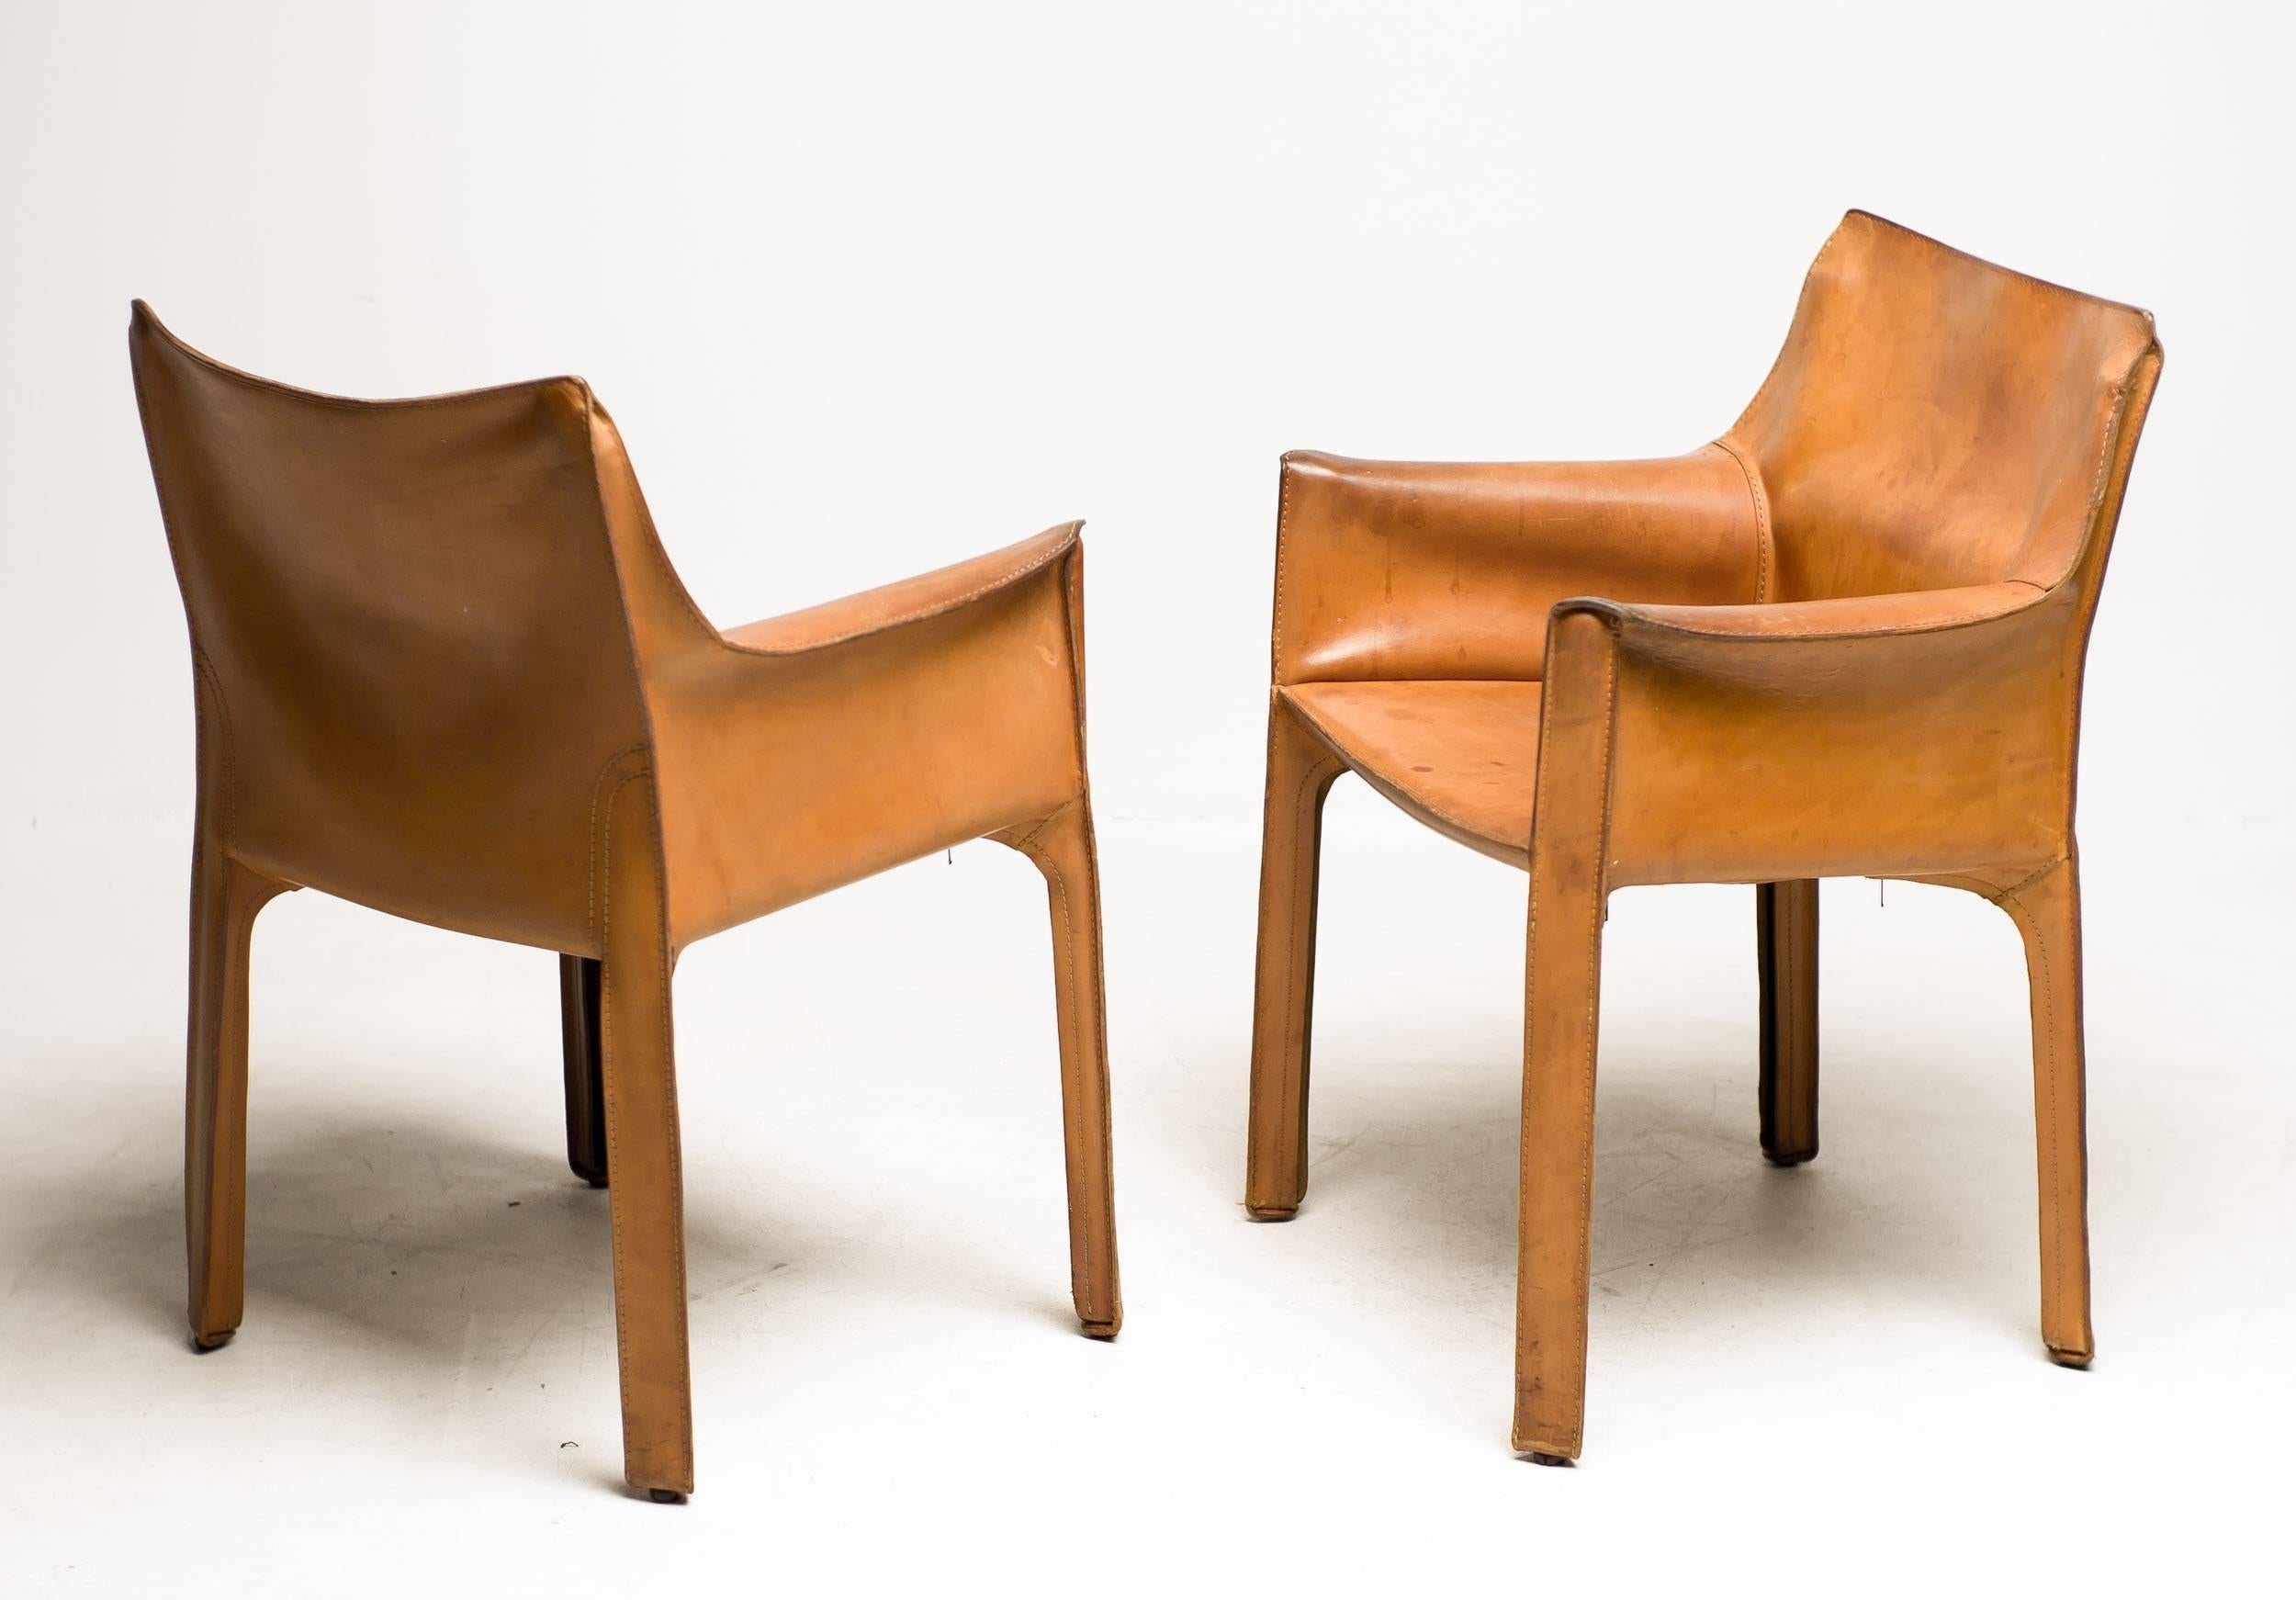 Cab chairs designed by Mario Bellini for Cassina Italy in the desirable and rare natural saddle leather. Great original vintage condition. Signed with molded manufacturer's mark and stamped in the leather.

Excellent fast and affordable worldwide